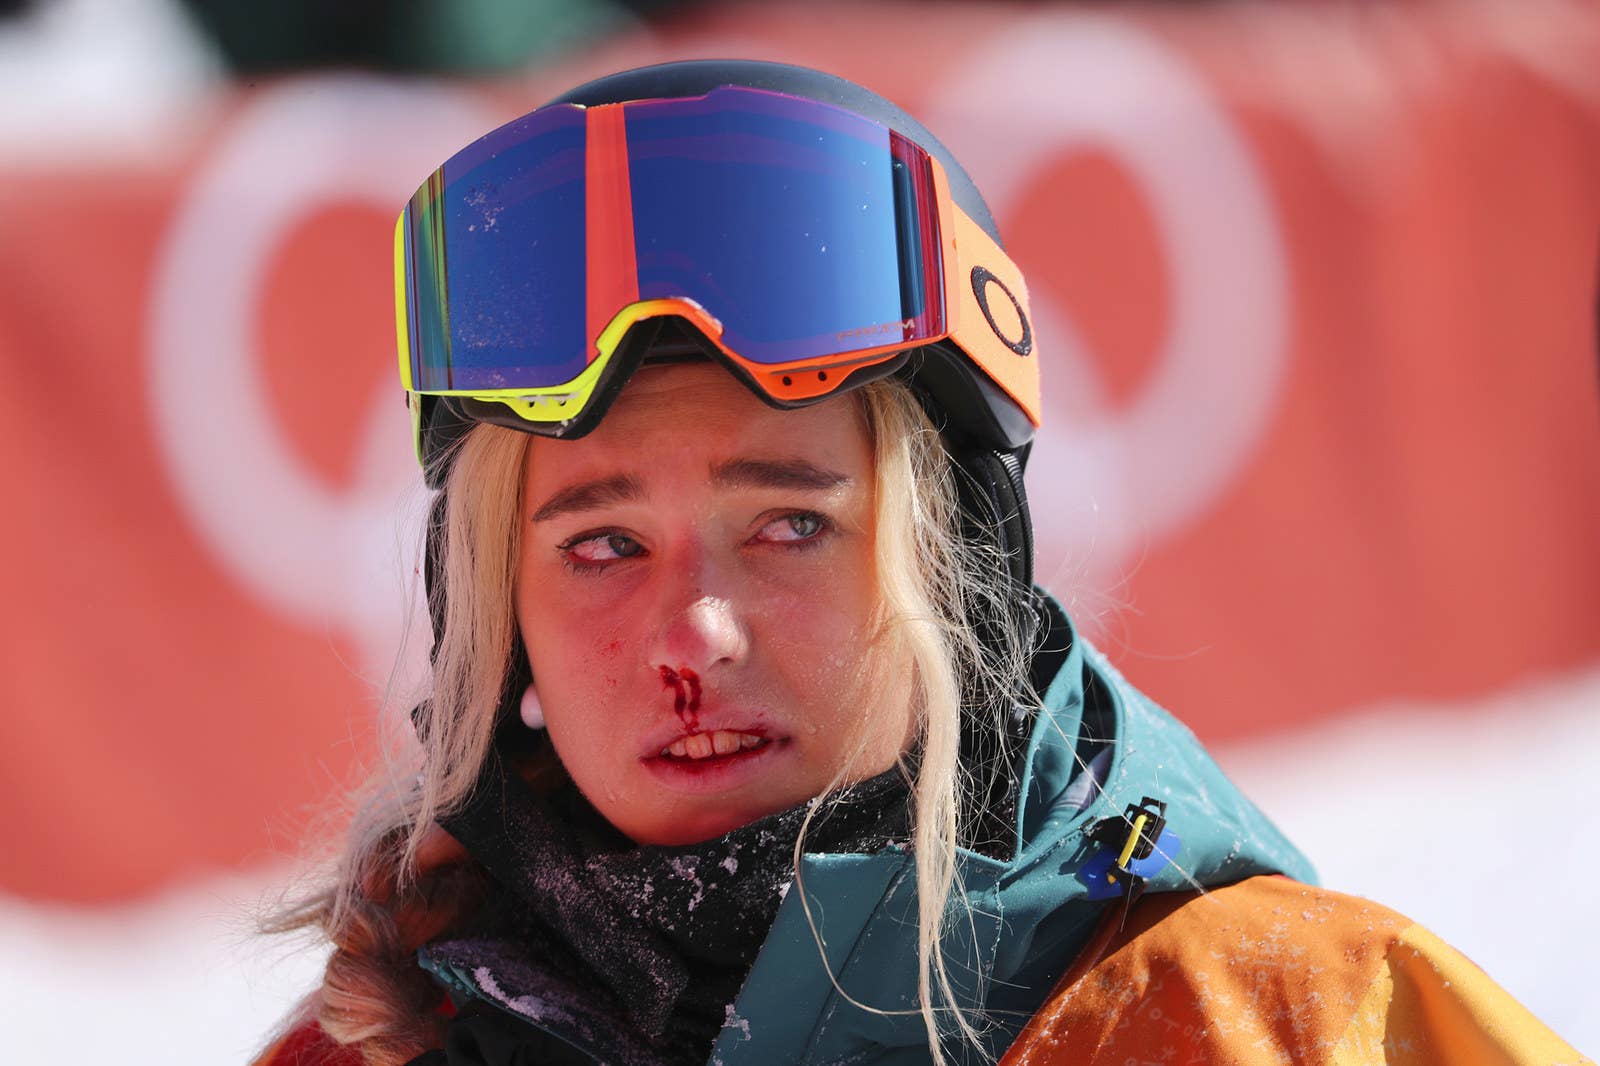 Emily Arthur of Australia is left bleeding after falling in her final run during the women's halfpipe final at the Pyeongchang 2018 Winter Olympics on Feb. 13.